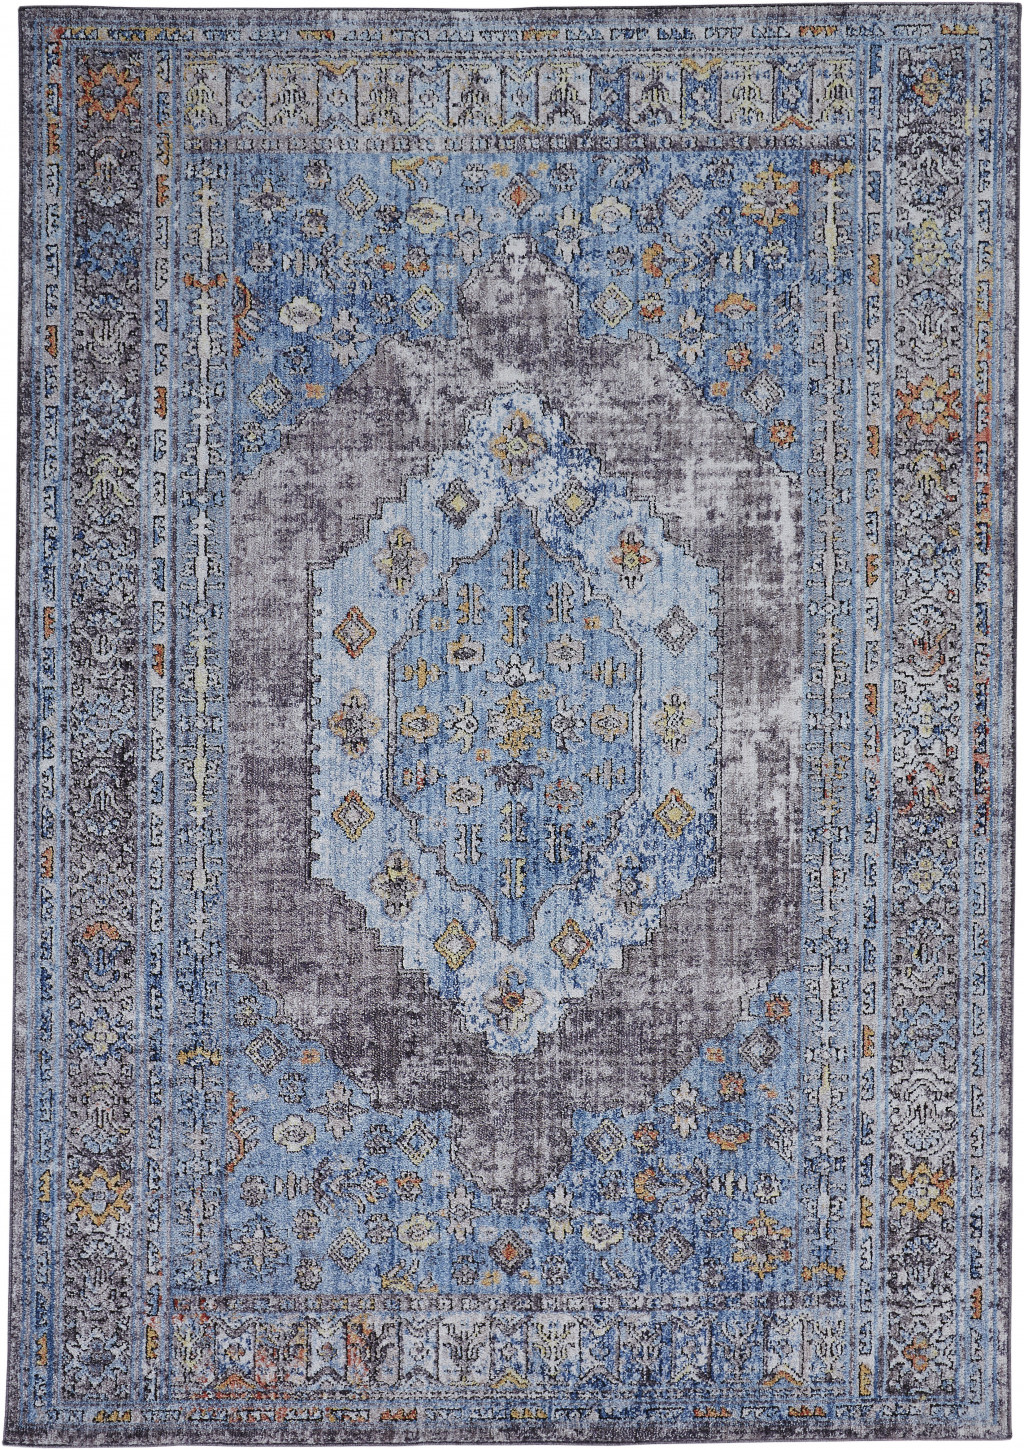 8' X 10' Blue Gray And Gold Floral Stain Resistant Area Rug-512338-1